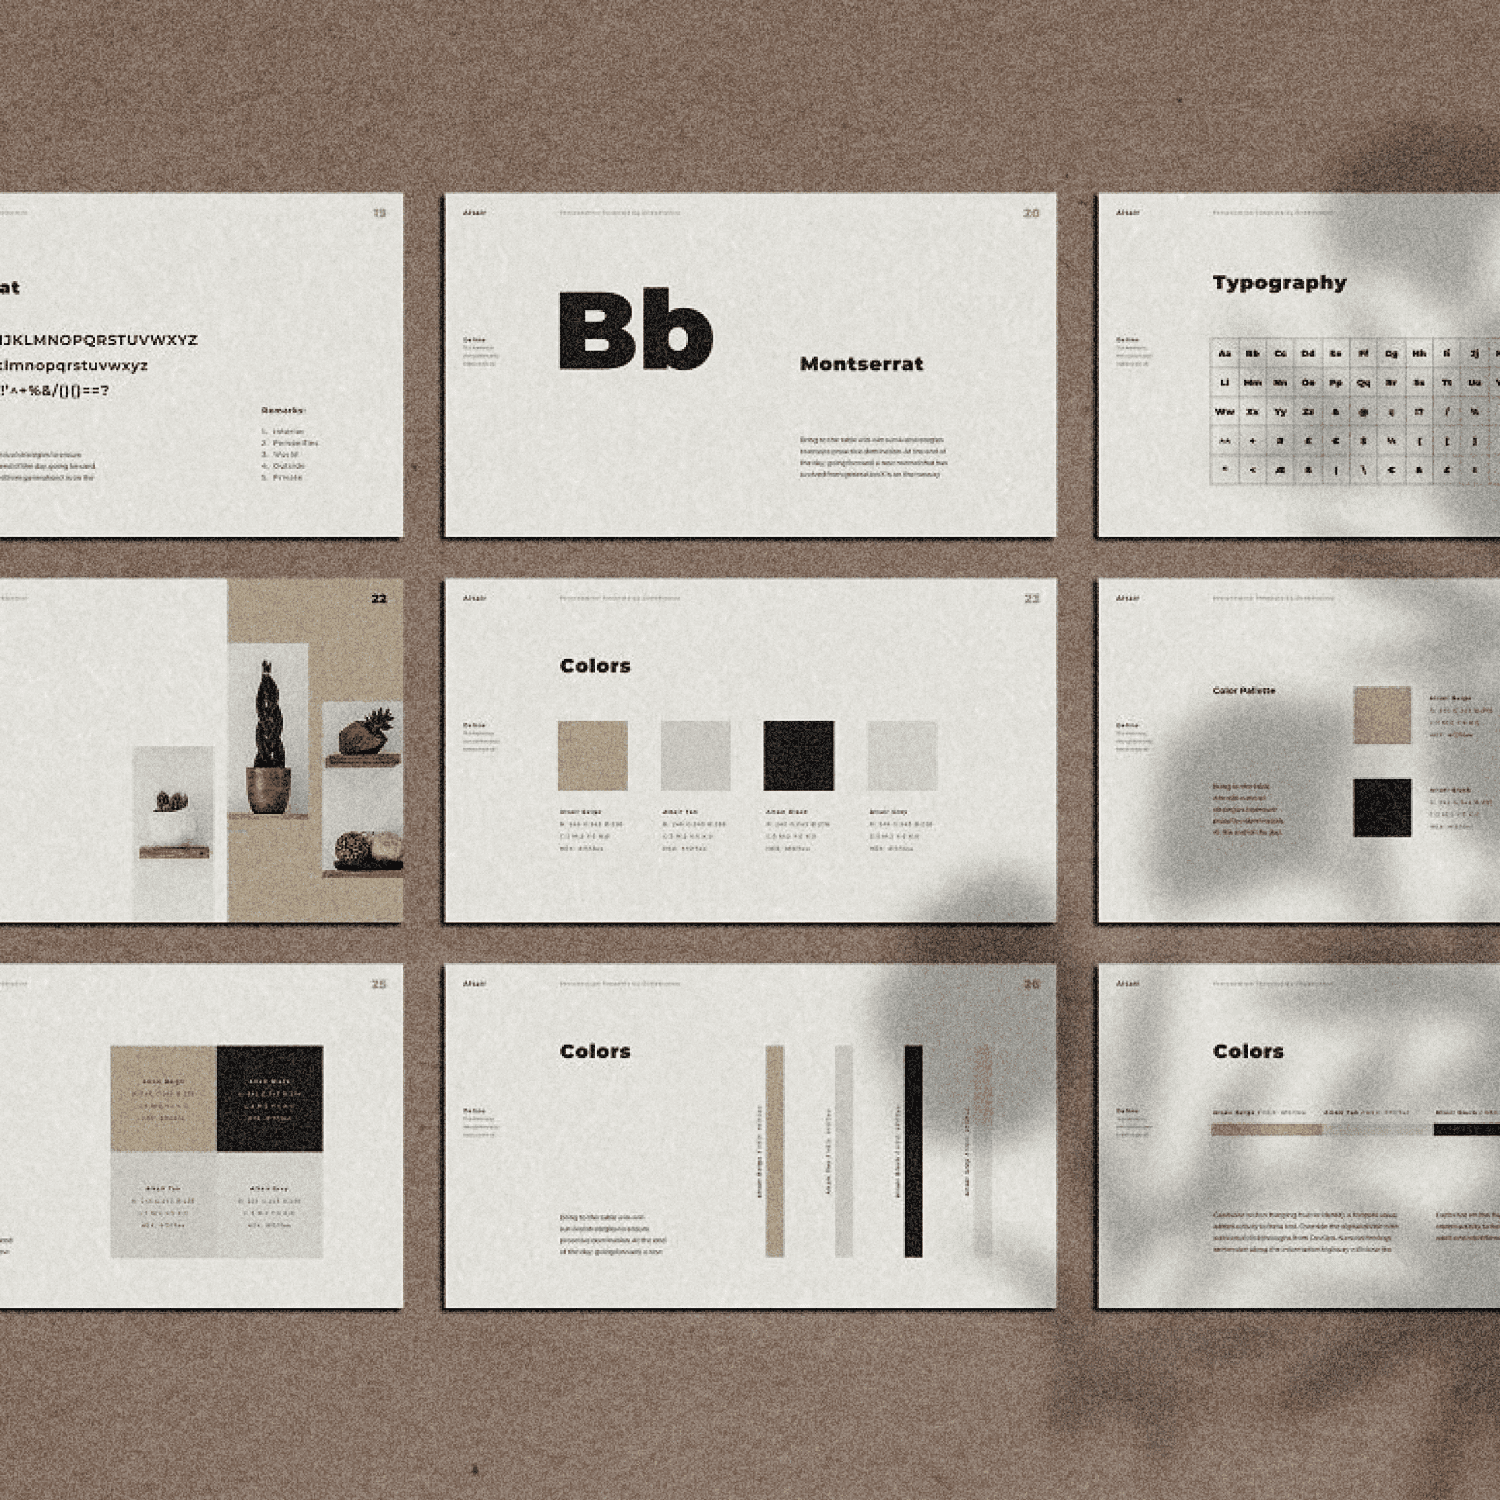 Altair PowerPoint Brand Guidelines cover.